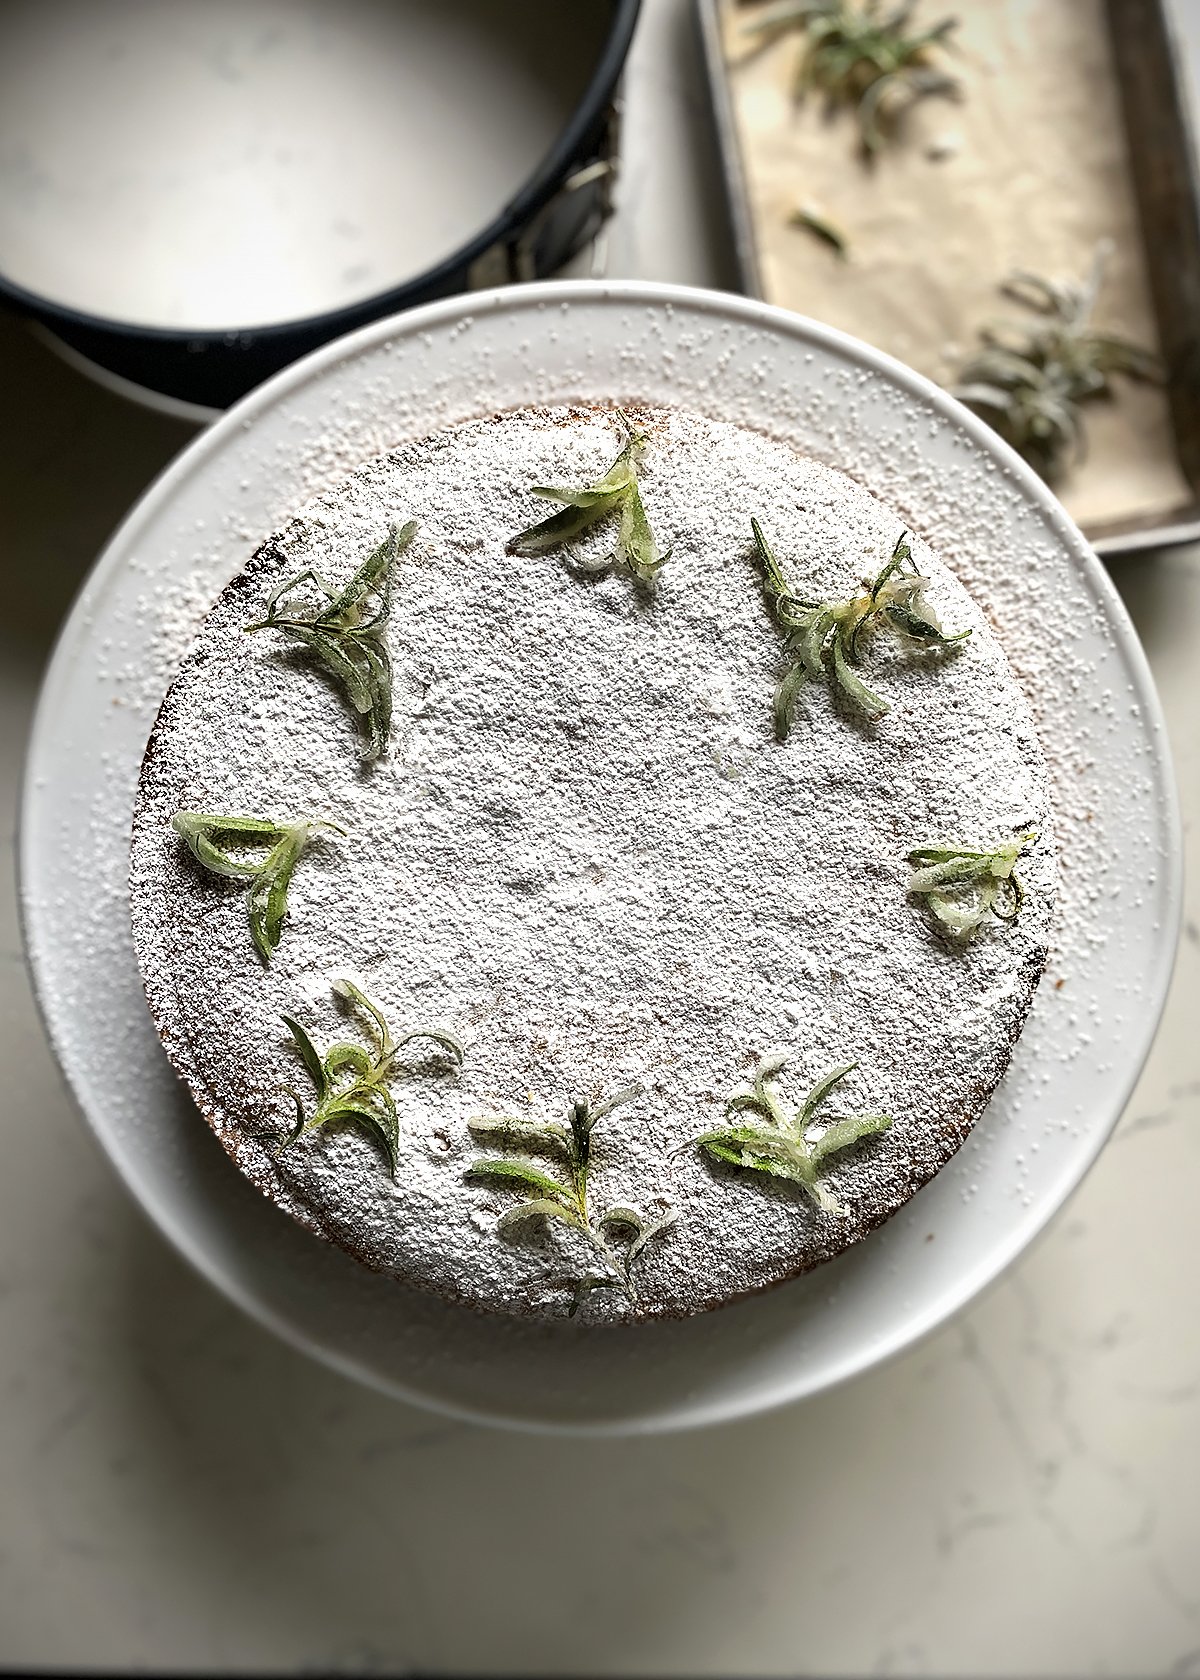 rosemary olive oil cake with candied rosemary